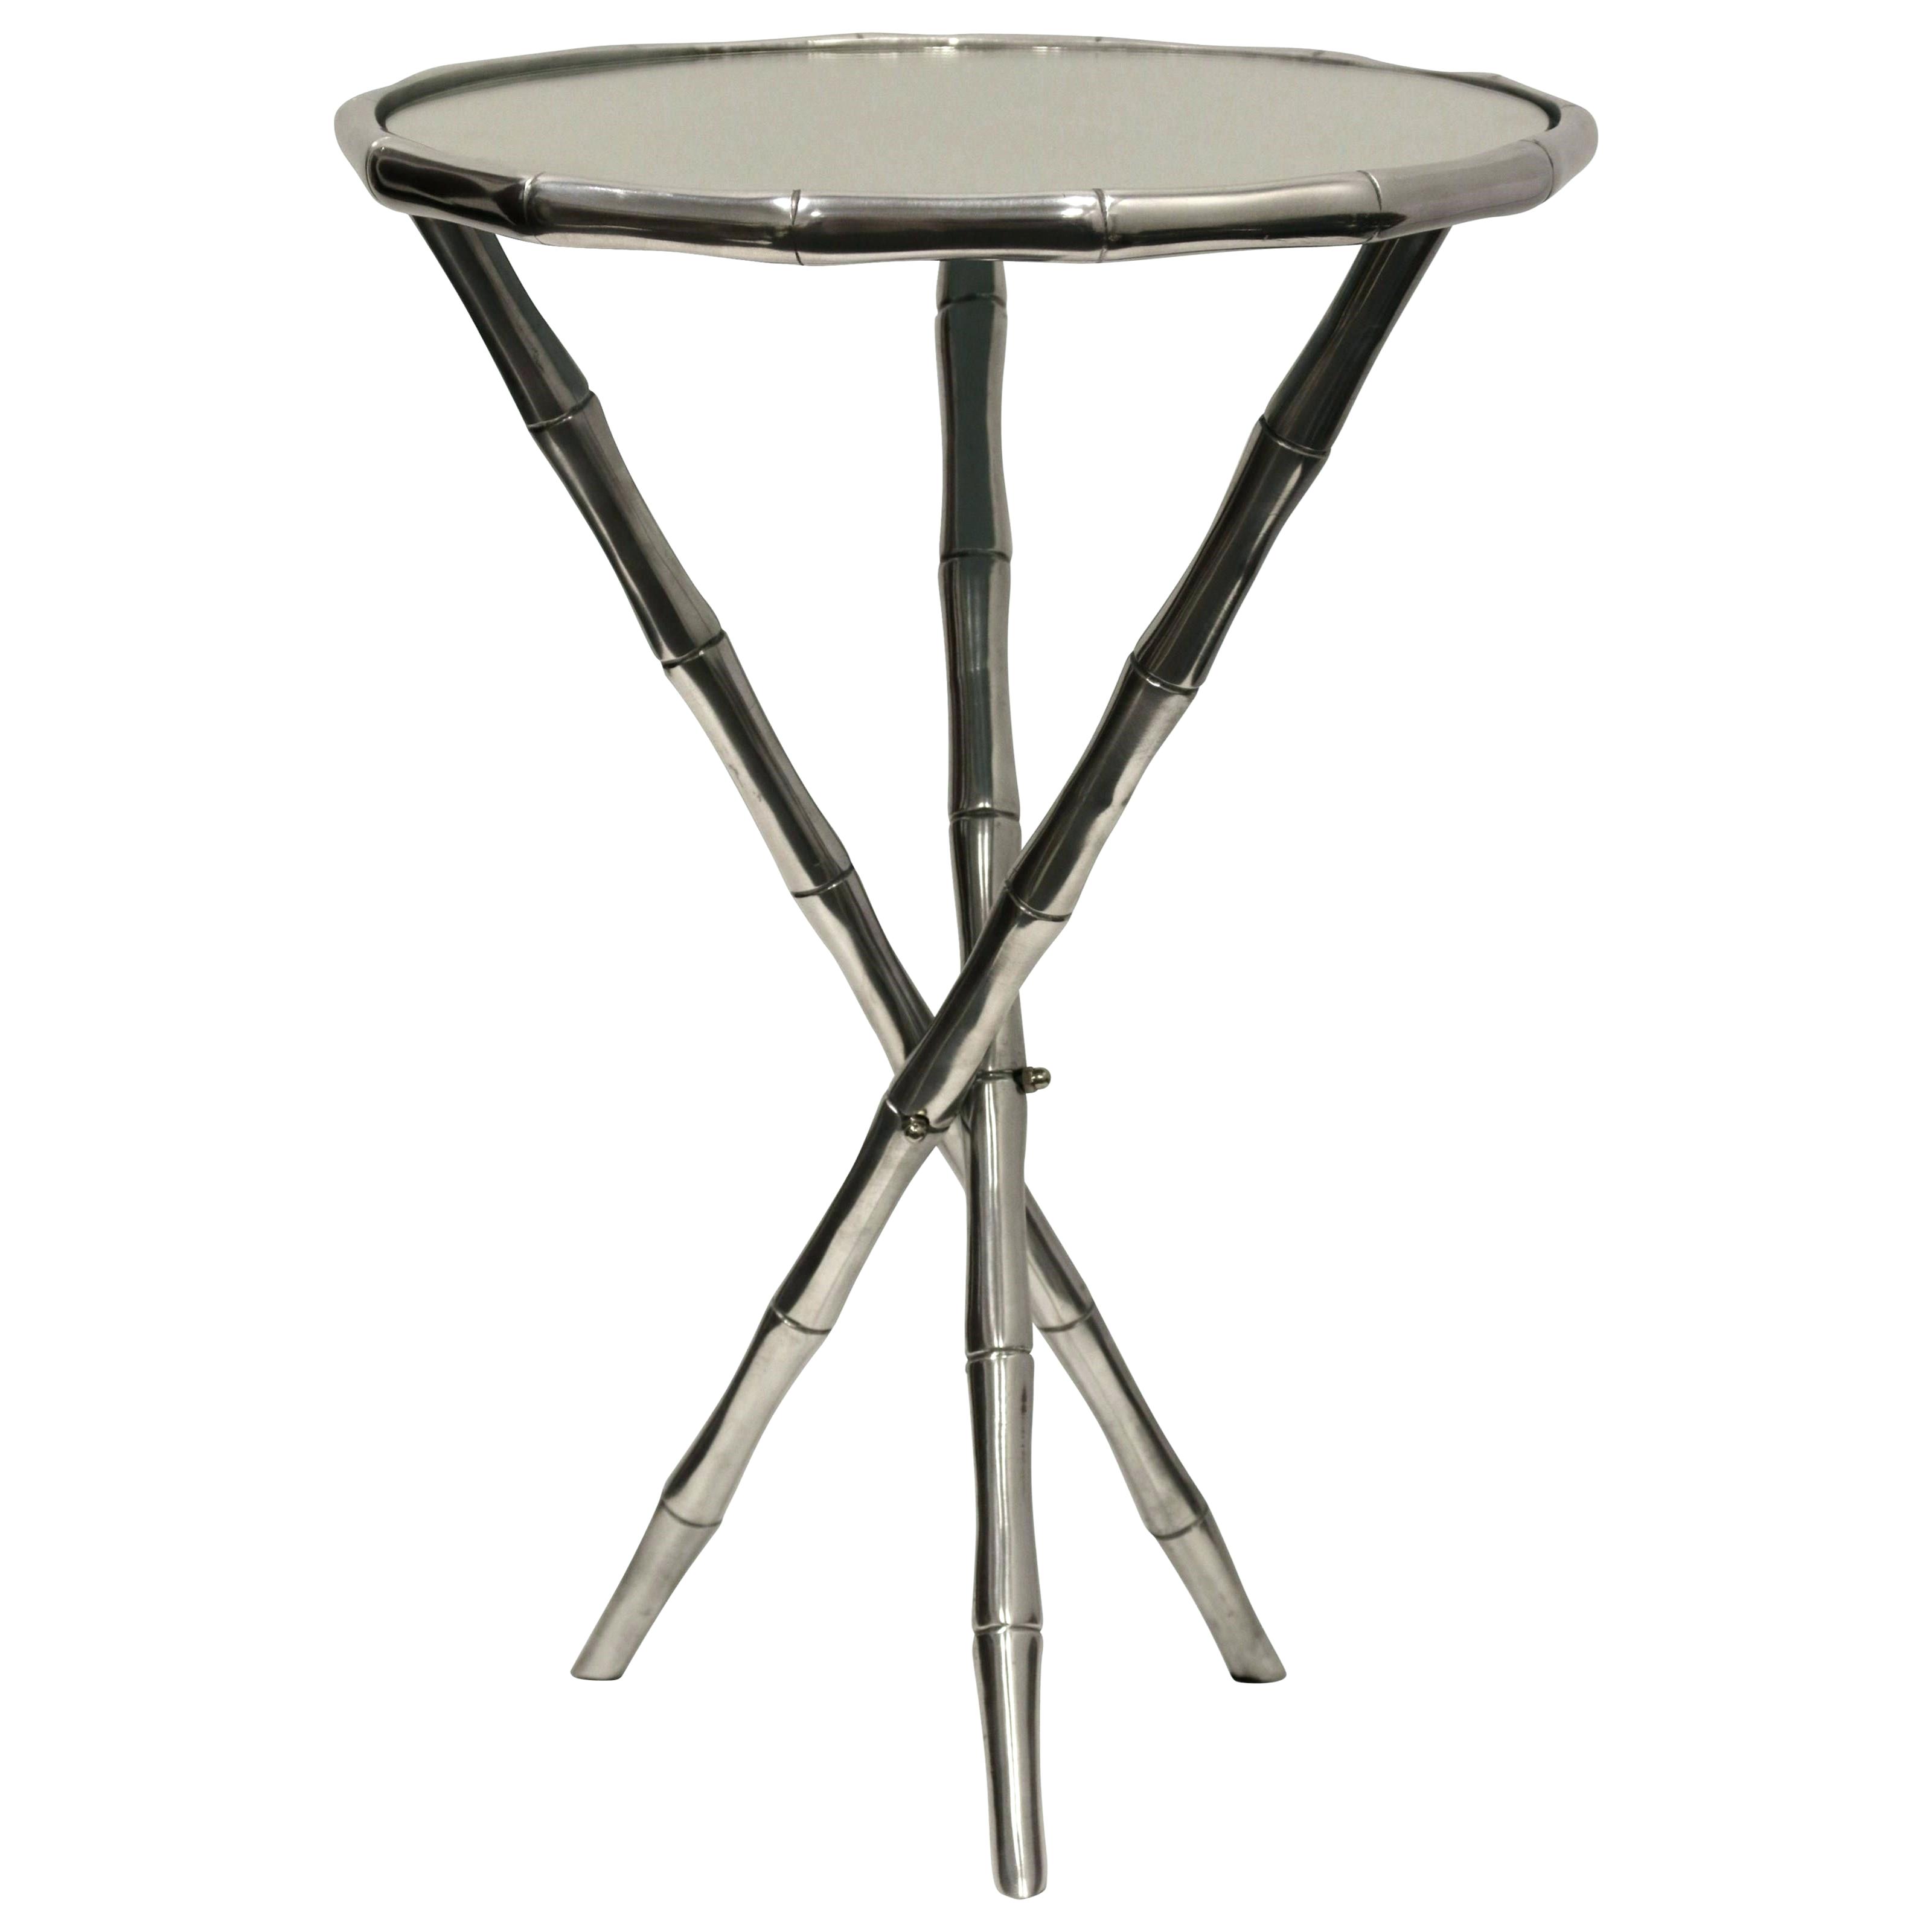 wrought iron accent tables glass top corranade metal outdoor table drum target threshold occasional round furniture kitchen marvellous roun small full size decorative stands for